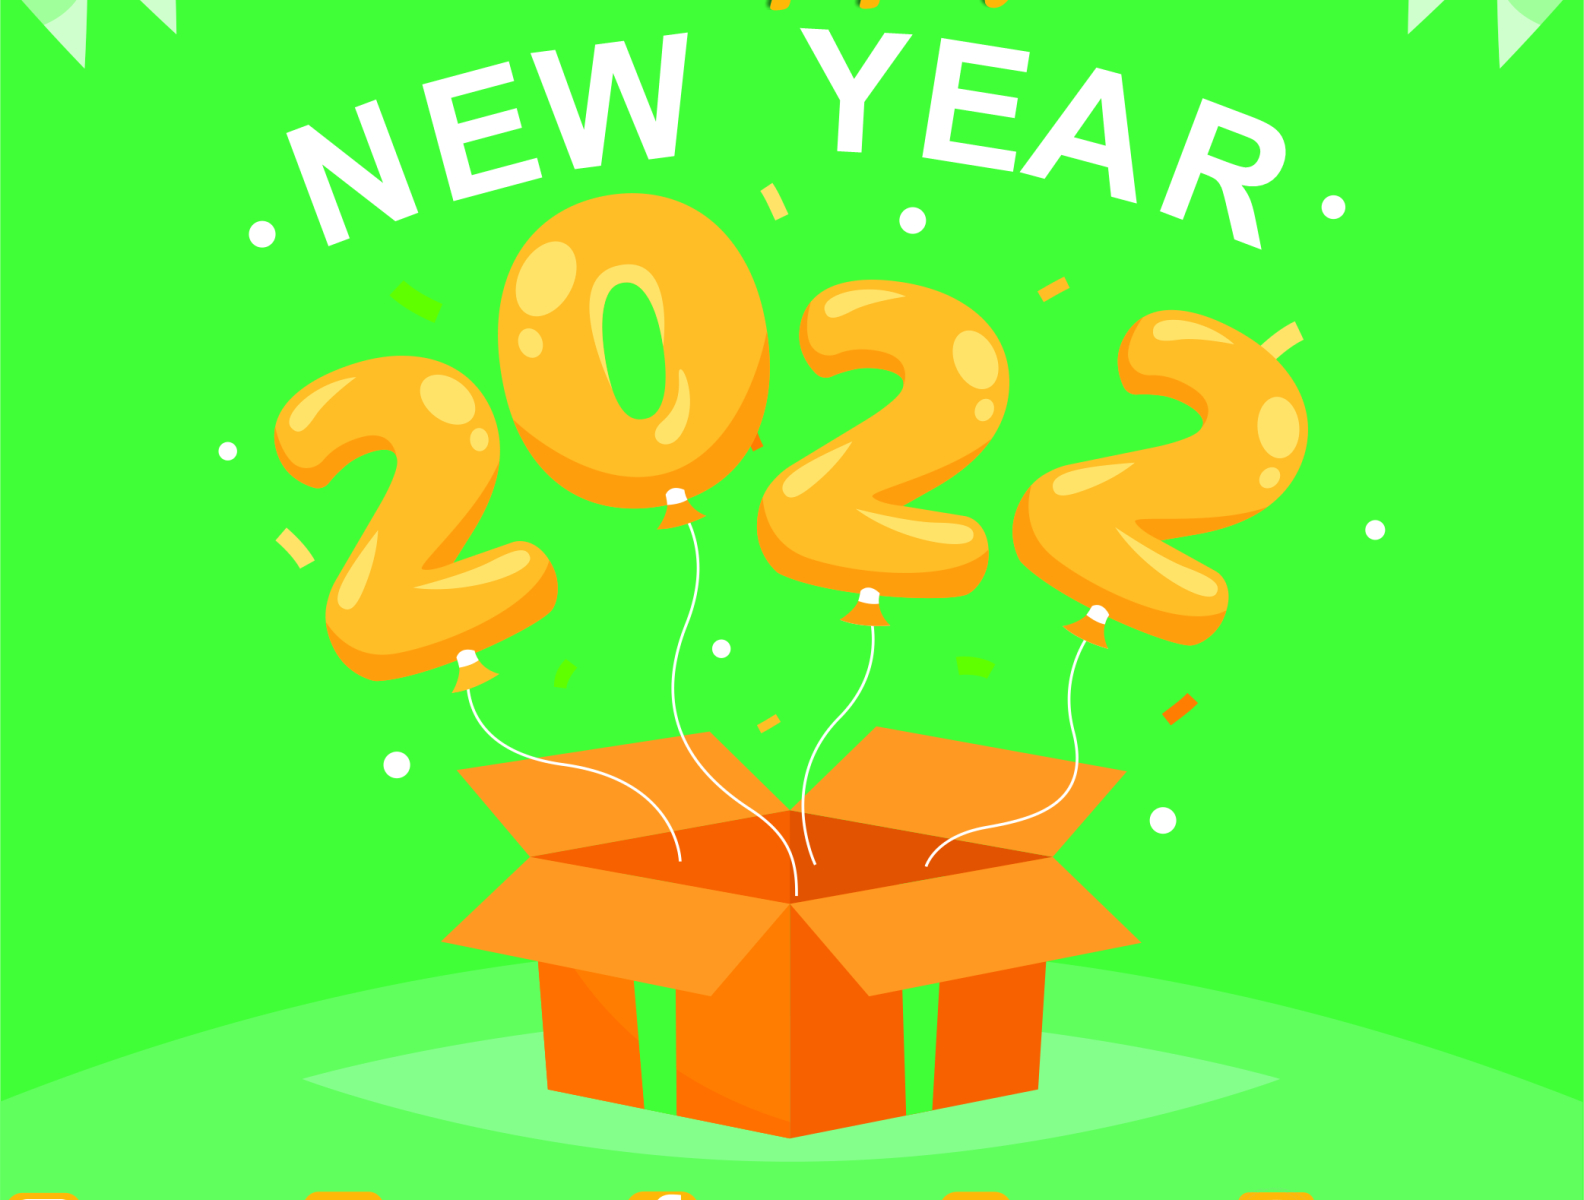 New Year by Agung Creative on Dribbble